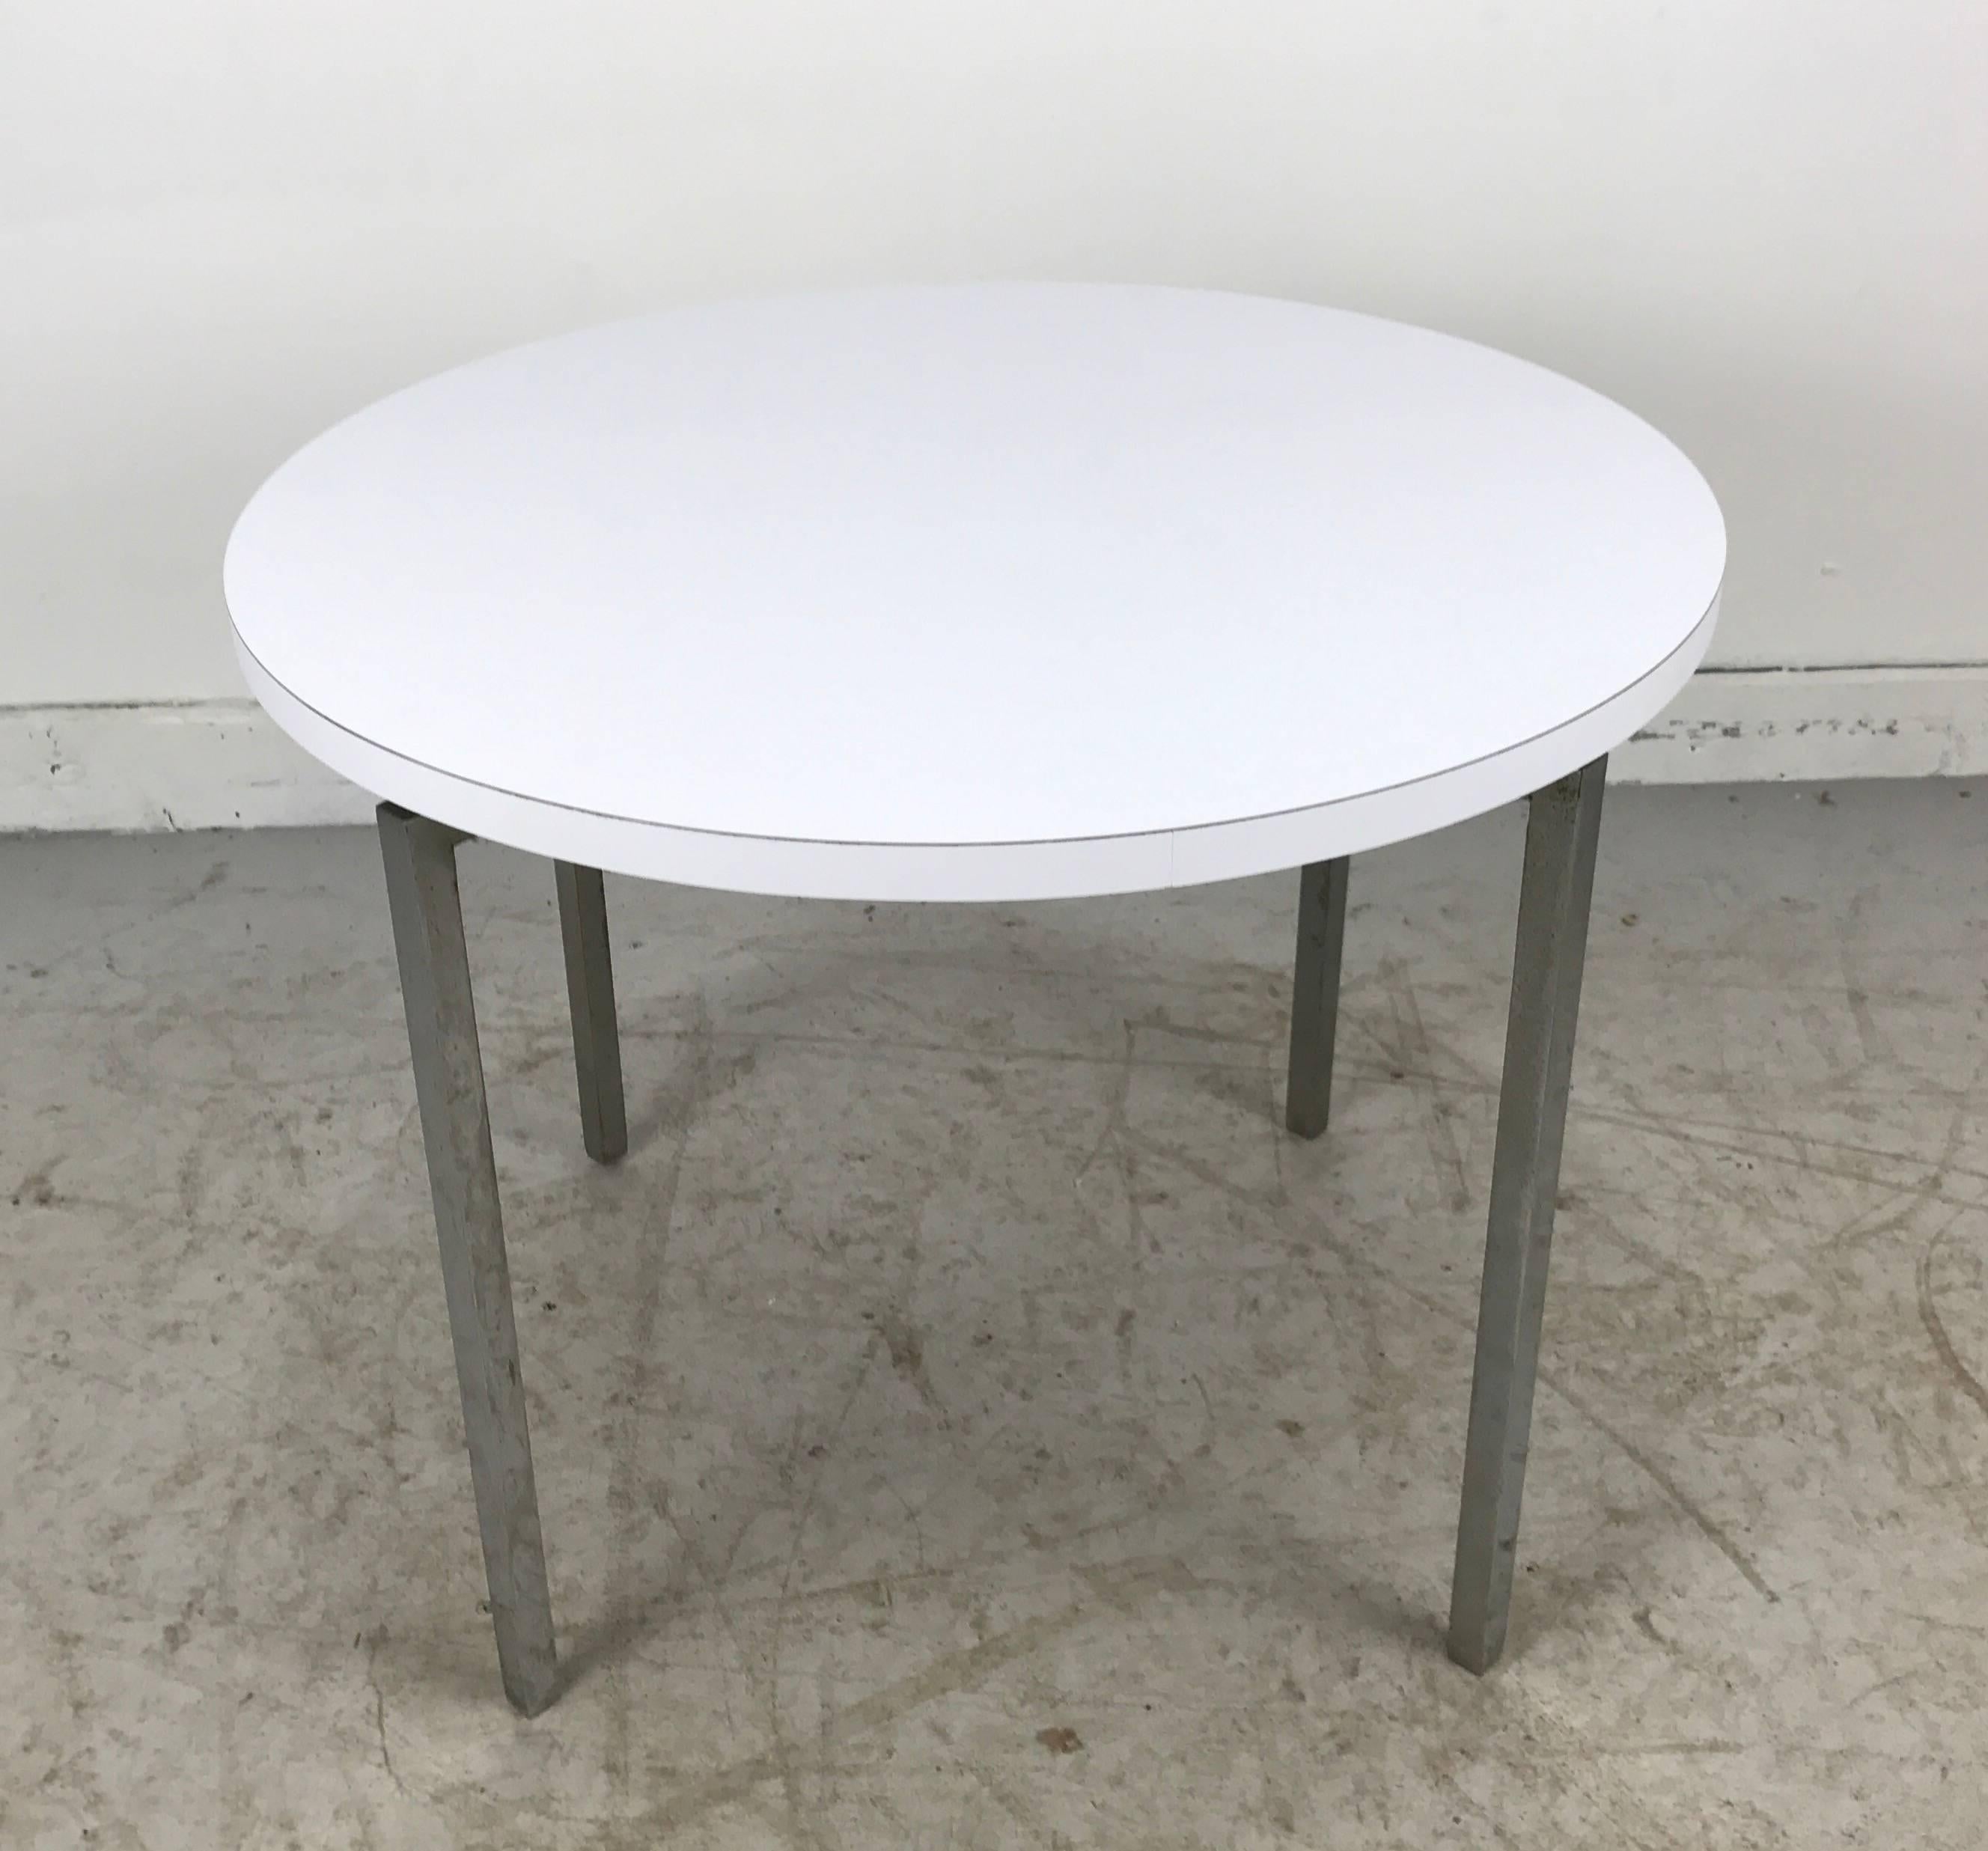 Classic modernist architectural design white laminate round top solid polished steel 